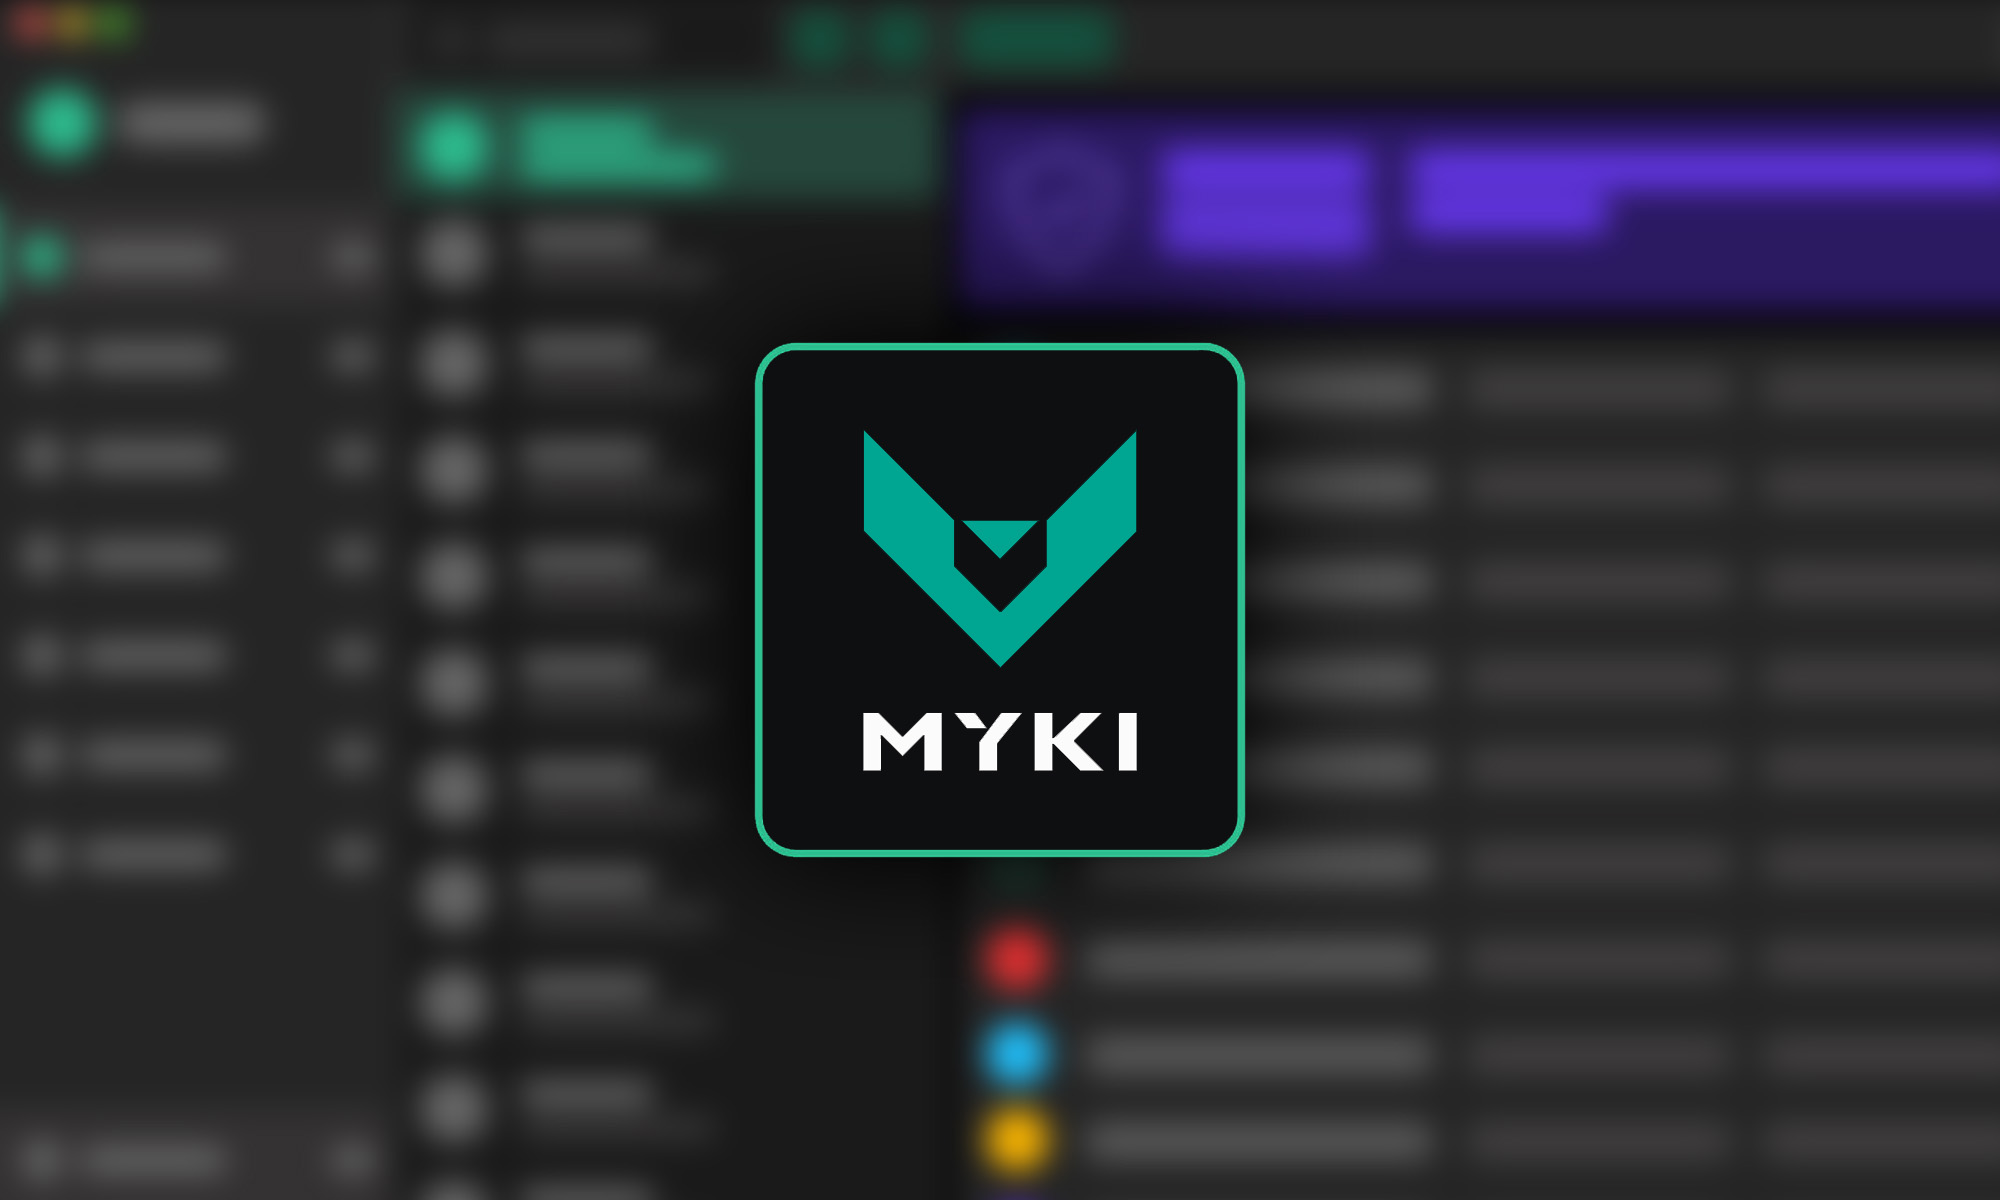 myki password manager 2fa authenticator review